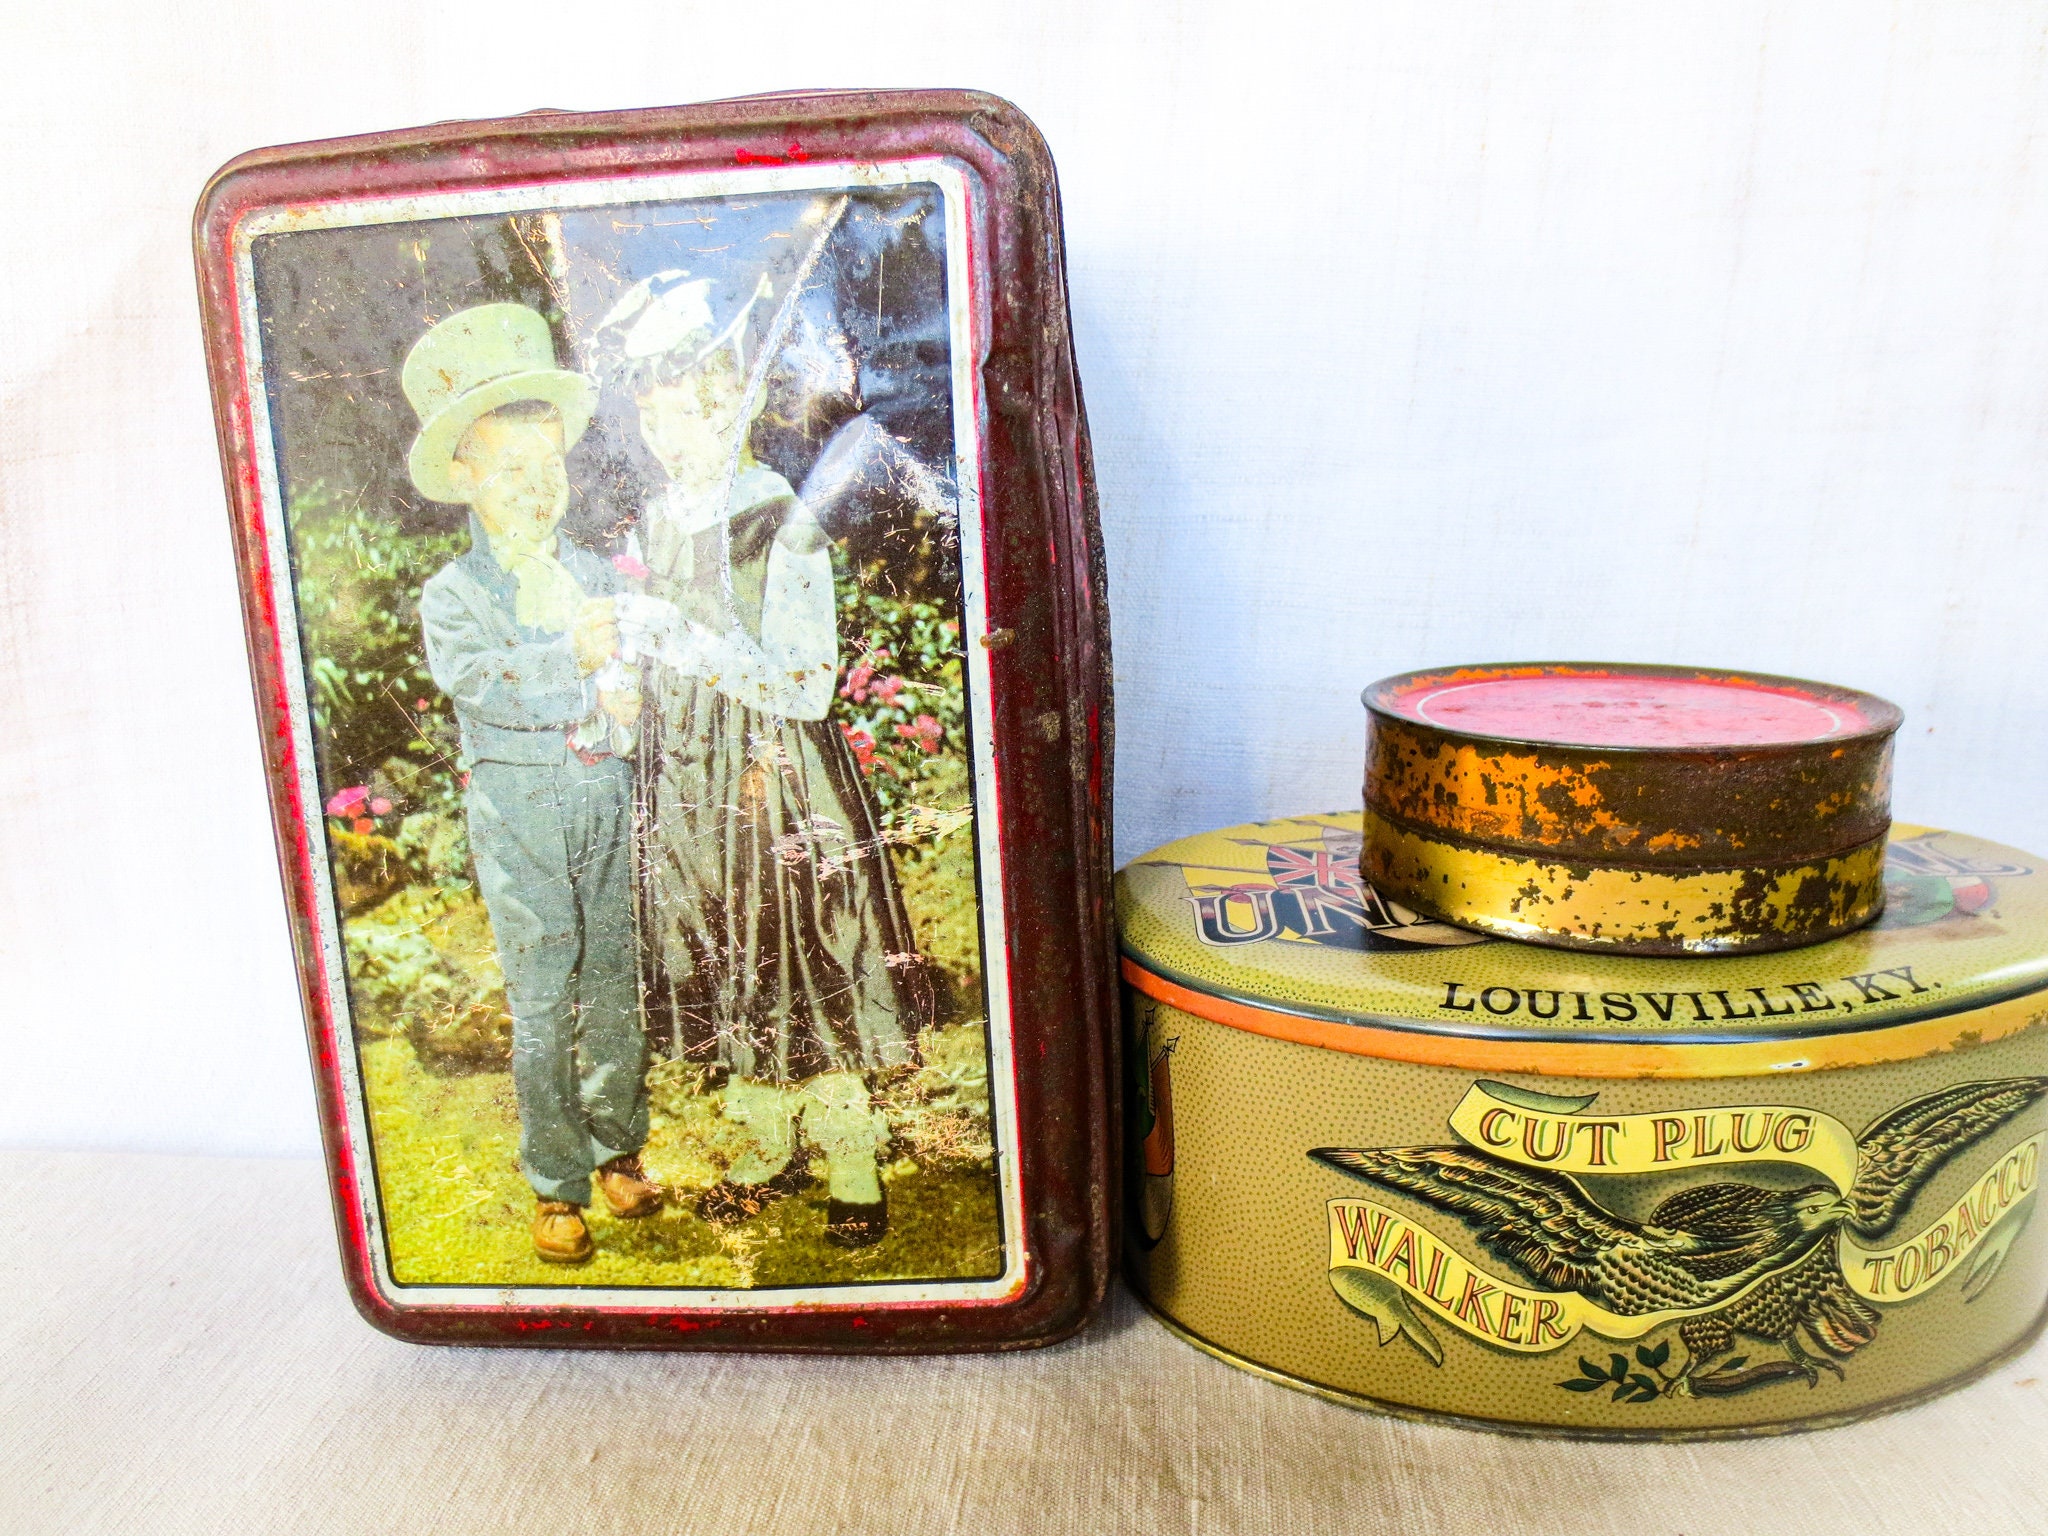 Sold at Auction: 8 Jacpol English Formula Antique Wax Polish Tins - as new,  all dark antique wax made by Morrells Wood Finishes, UK